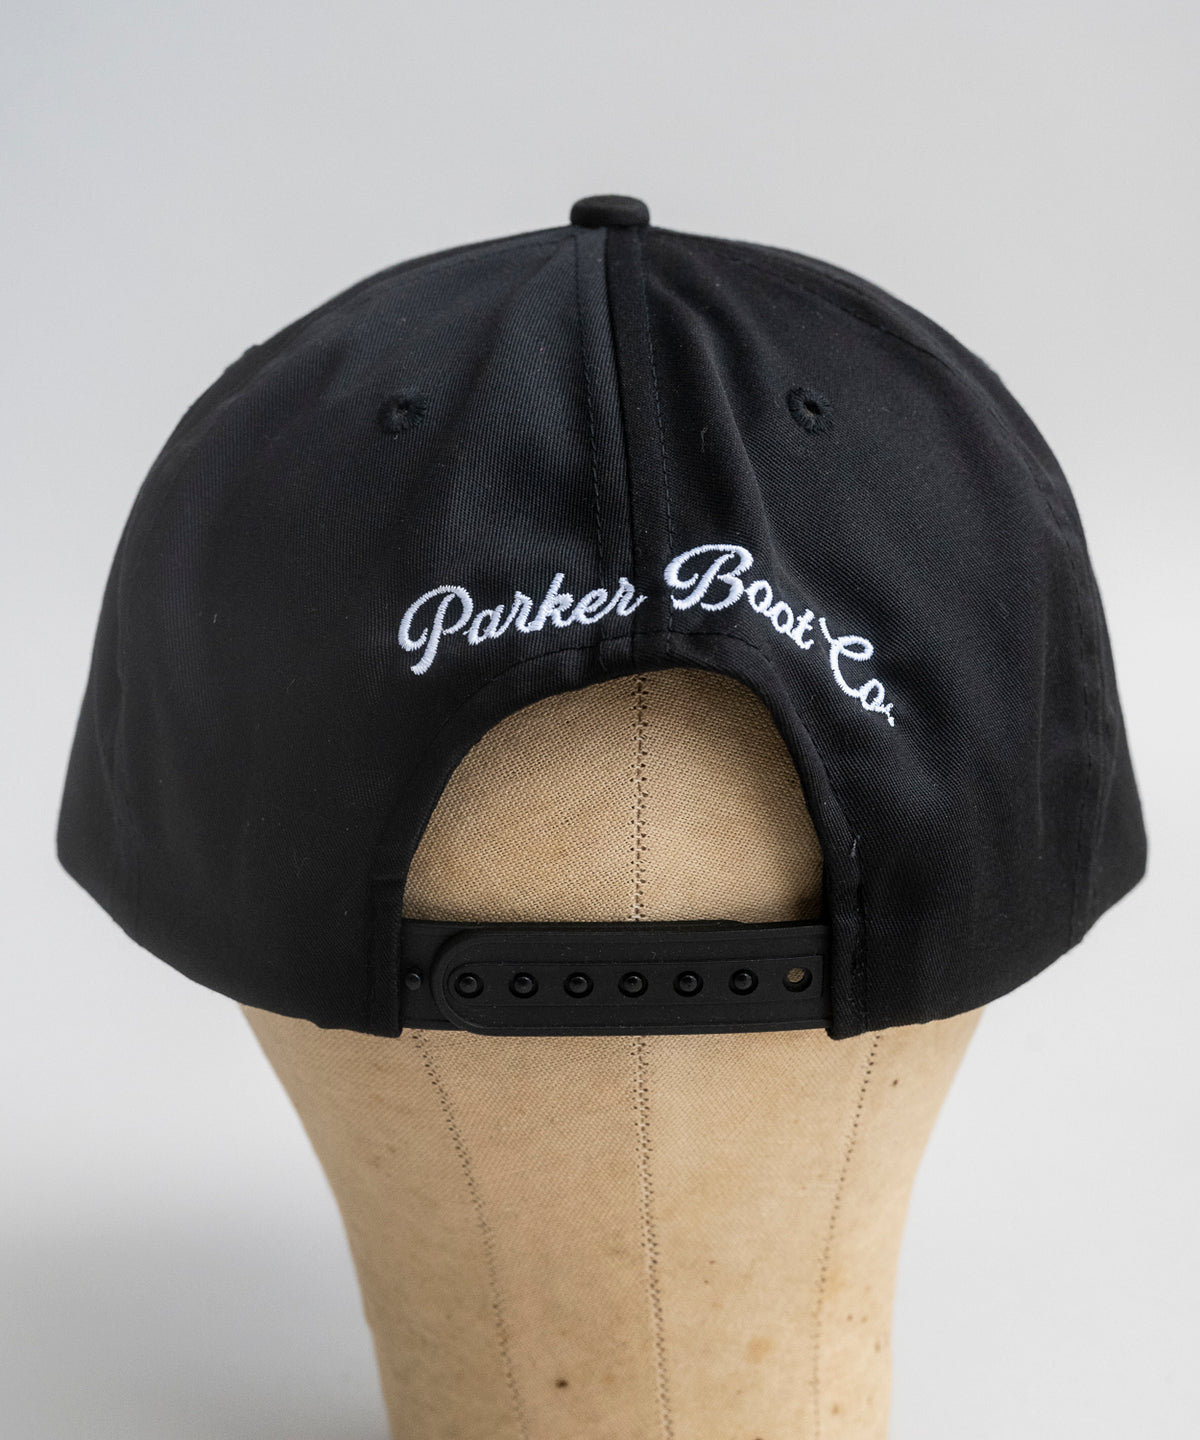 Parker Boot Co. Rope Hat